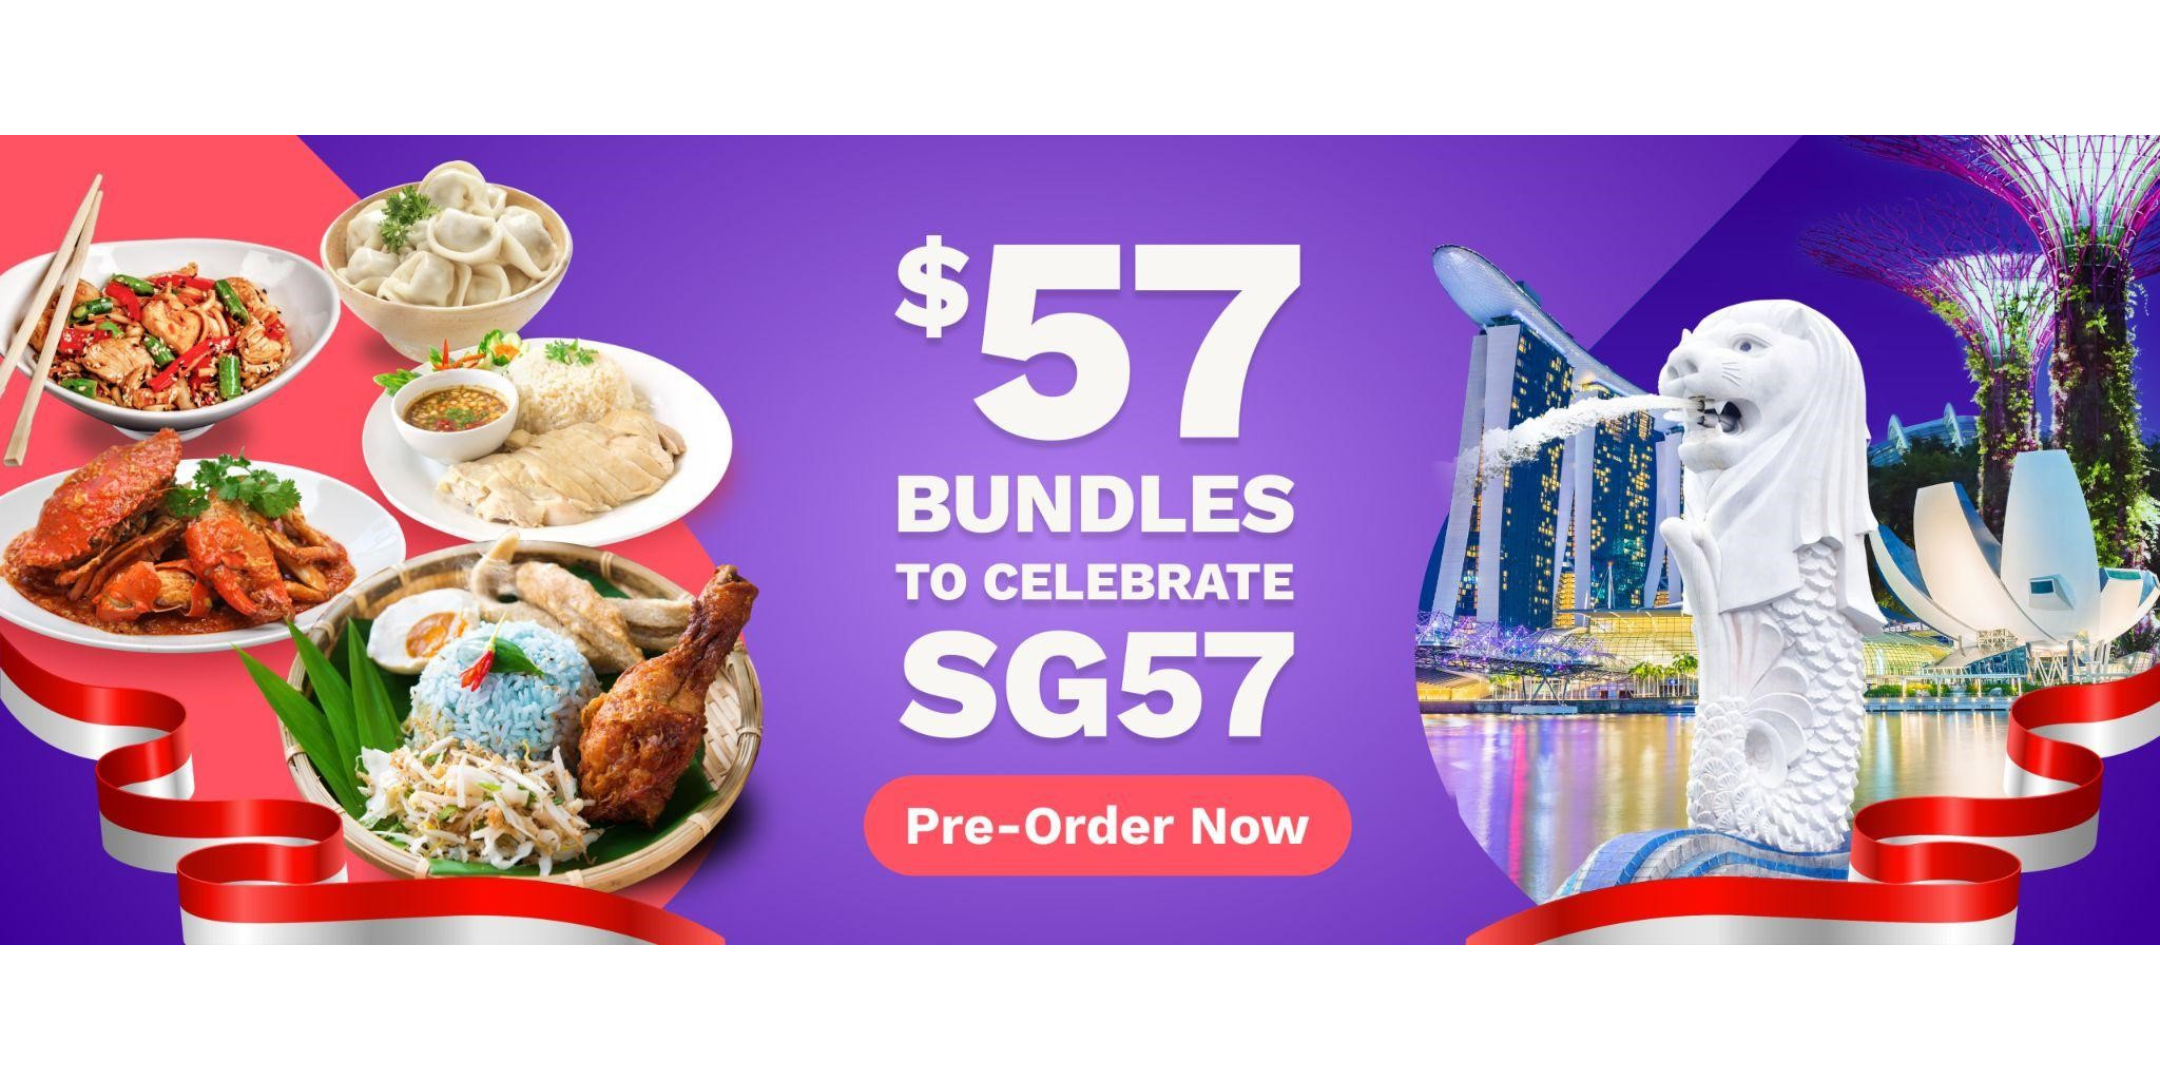 Celebrate Singapore National Day with $57 Bundle Deals Exclusively on Oddle Eats!